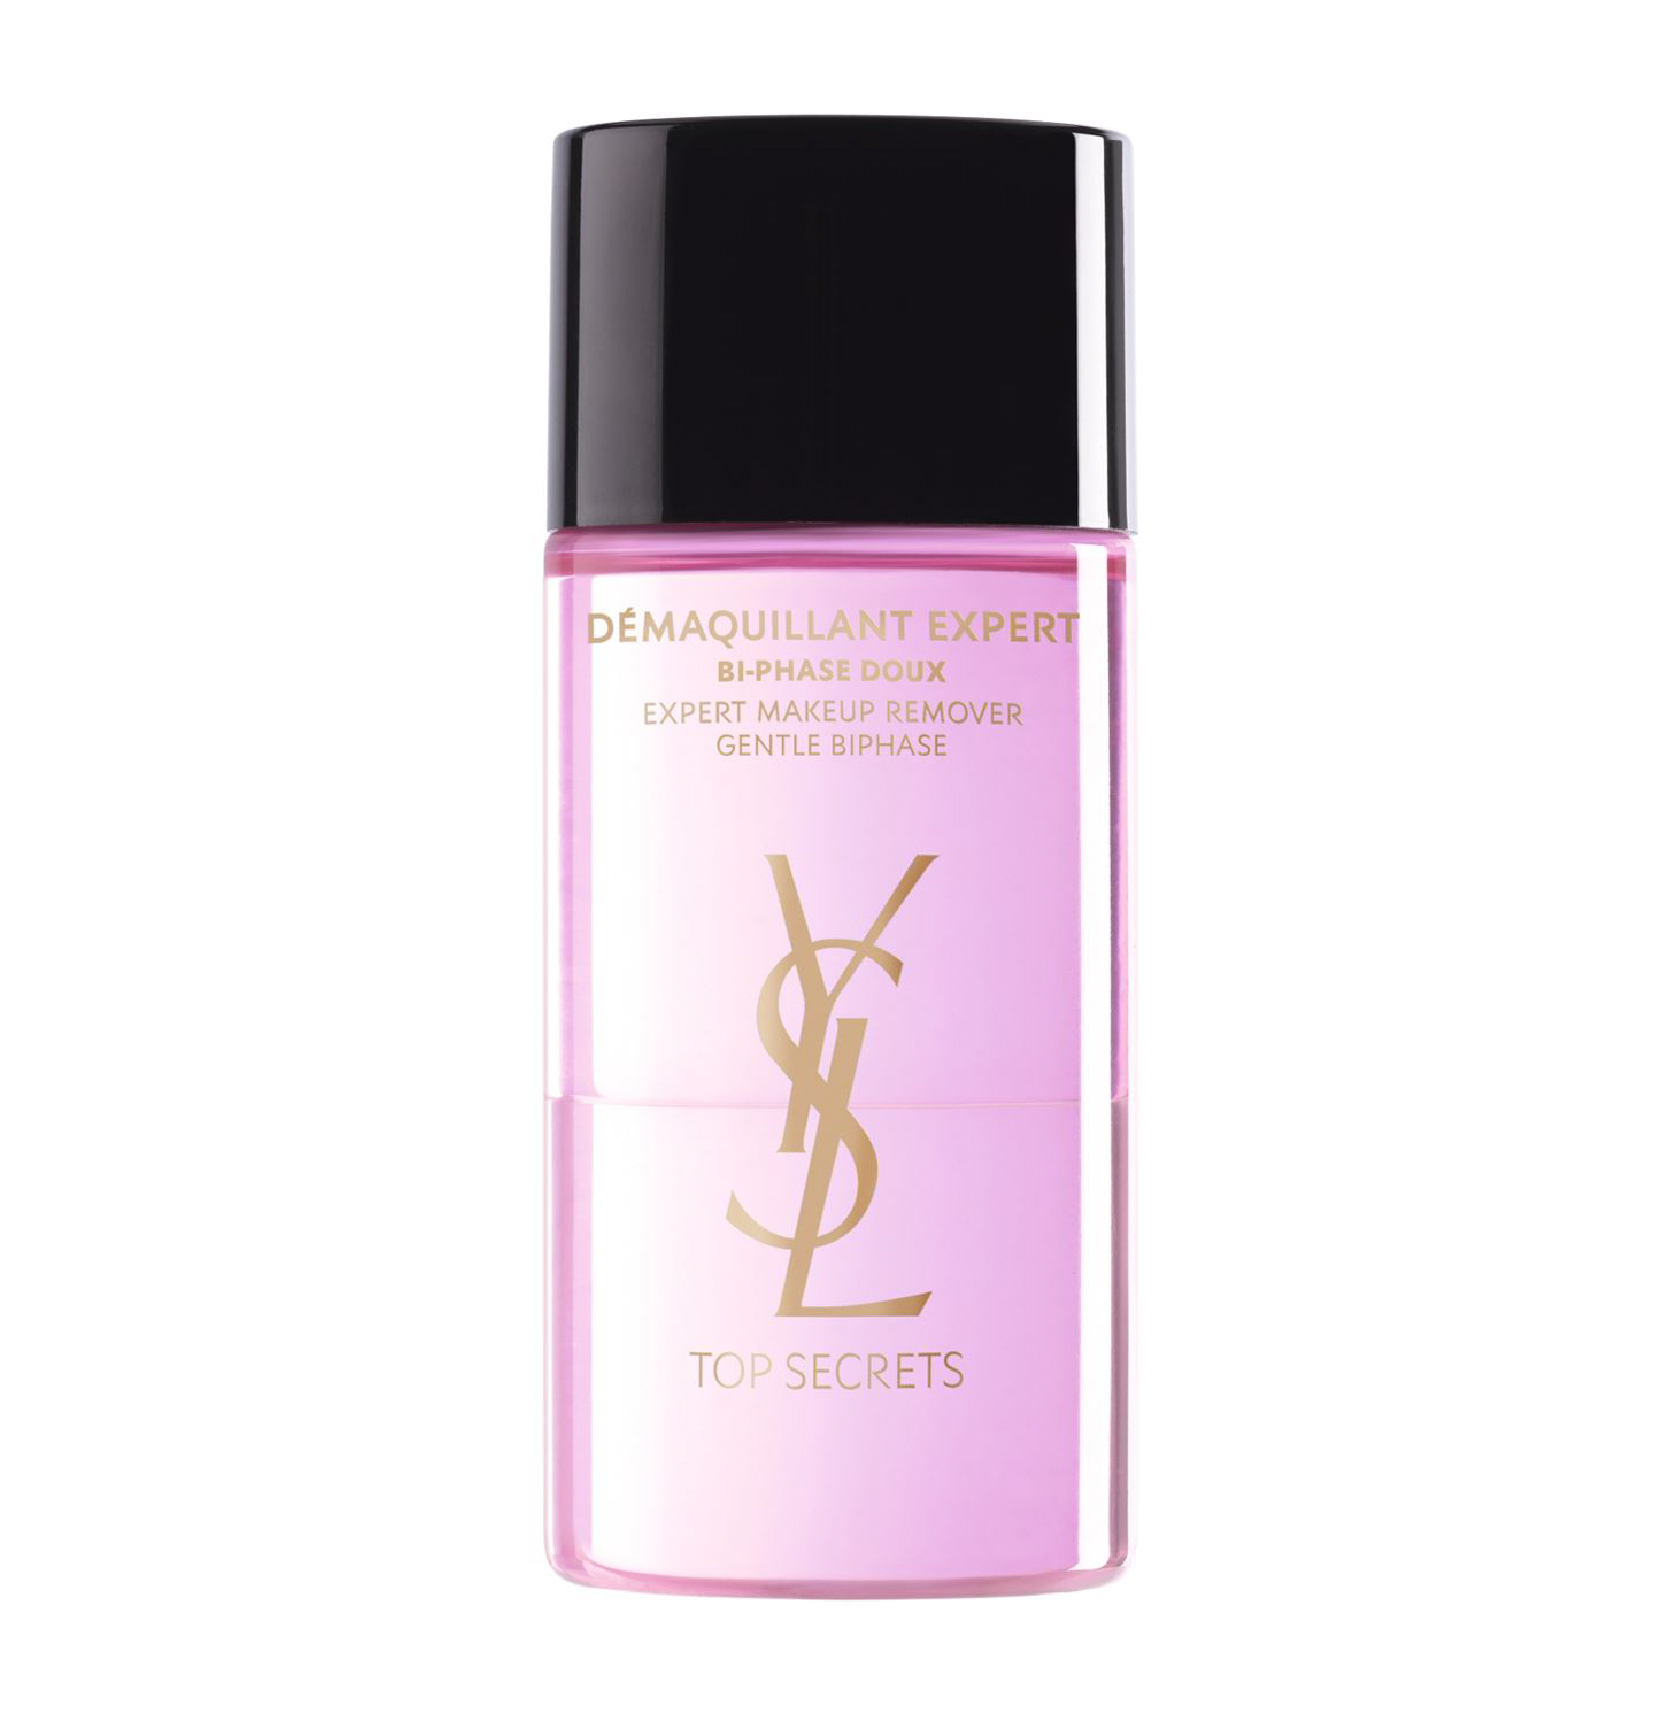 YSL - Top Secrets Expert Makeup Remover Eyes and Lips